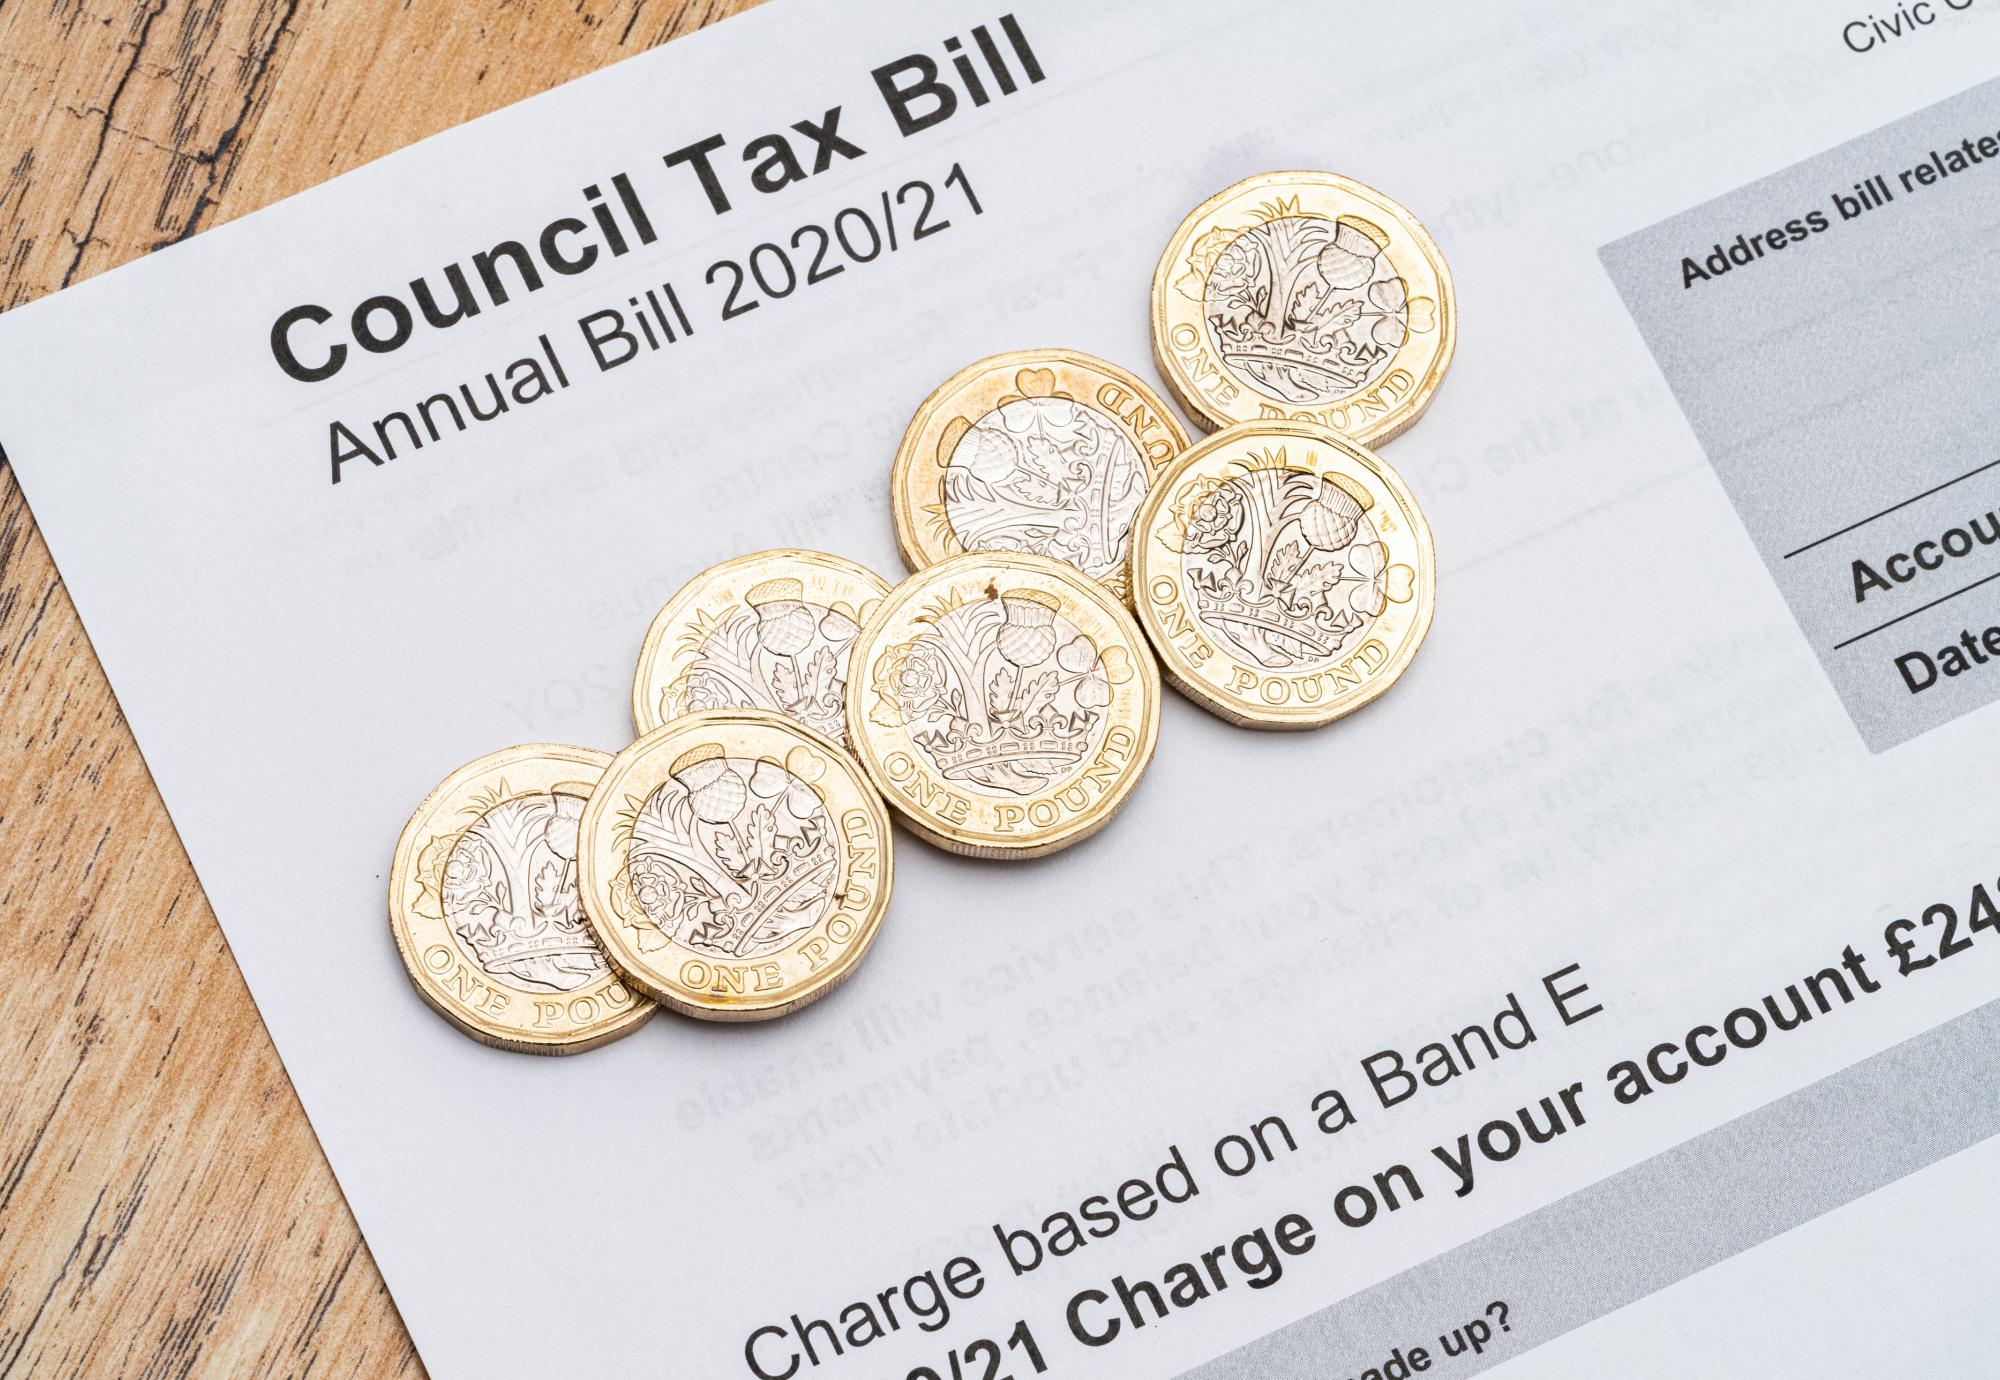 Council tax bill with coins on top.